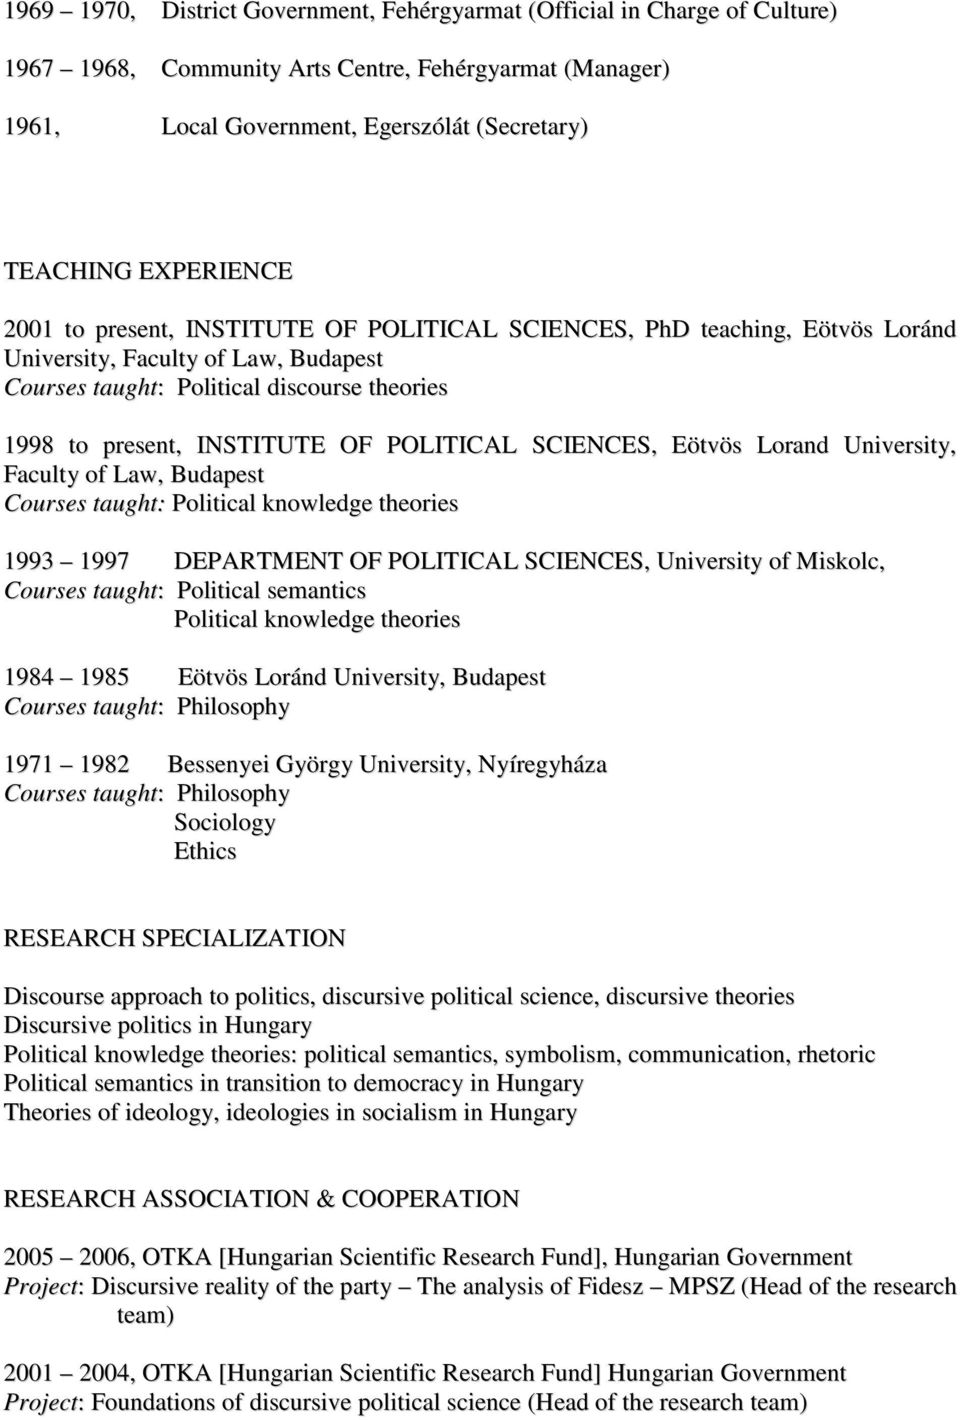 OF POLITICAL SCIENCES, Eötvös Lorand University, Faculty of Law, Budapest Courses taught: Political knowledge theories 1993 1997 DEPARTMENT OF POLITICAL SCIENCES, University of Miskolc, Courses